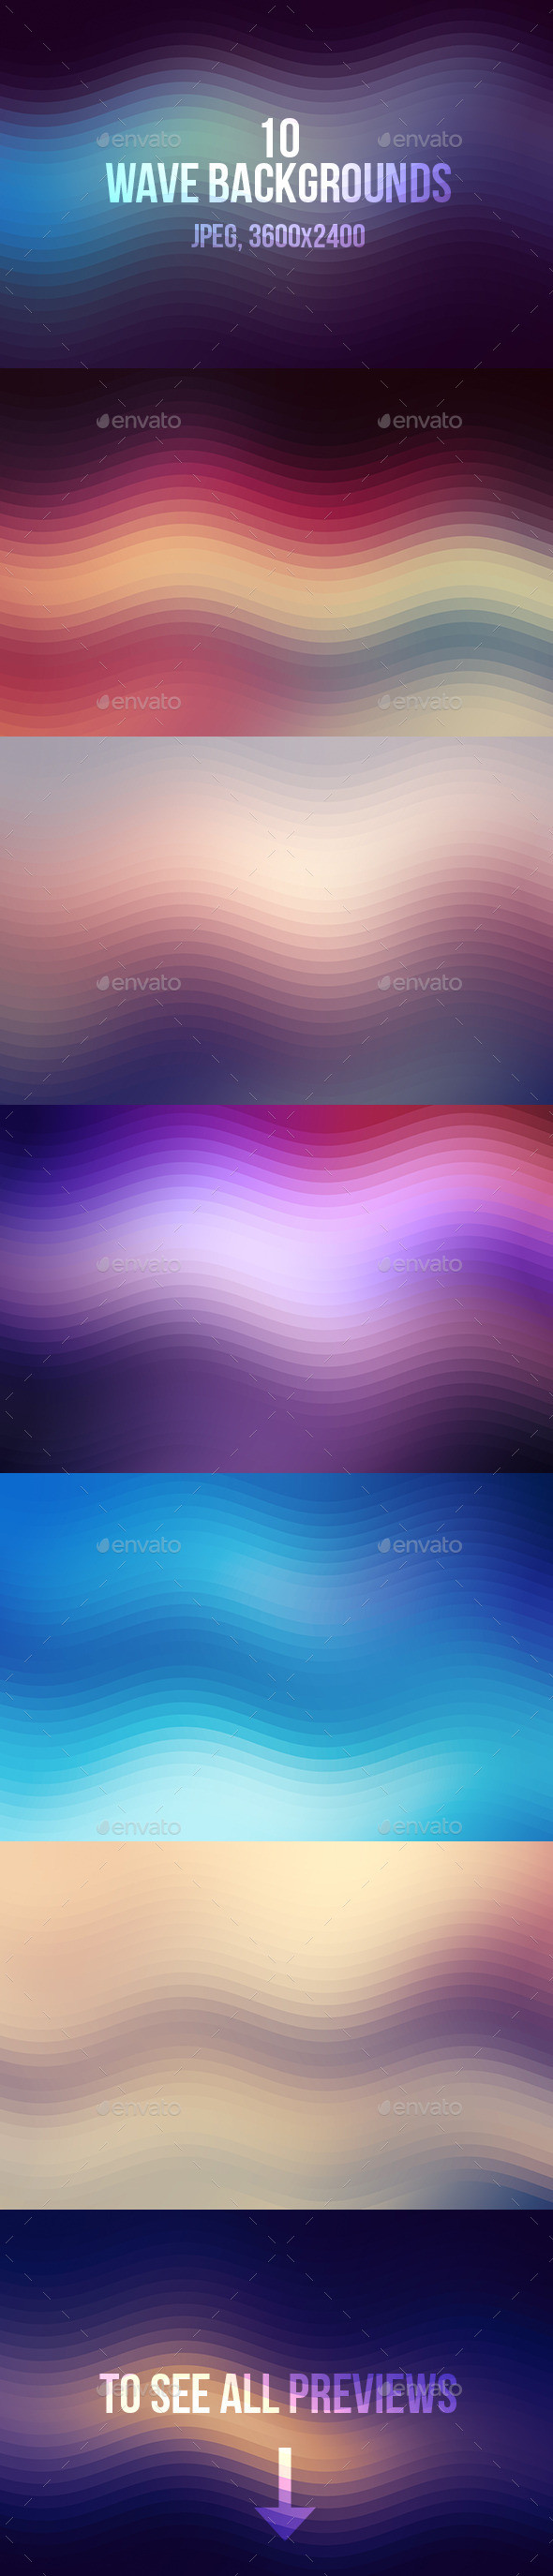 Wave backgrounds vol2 preview